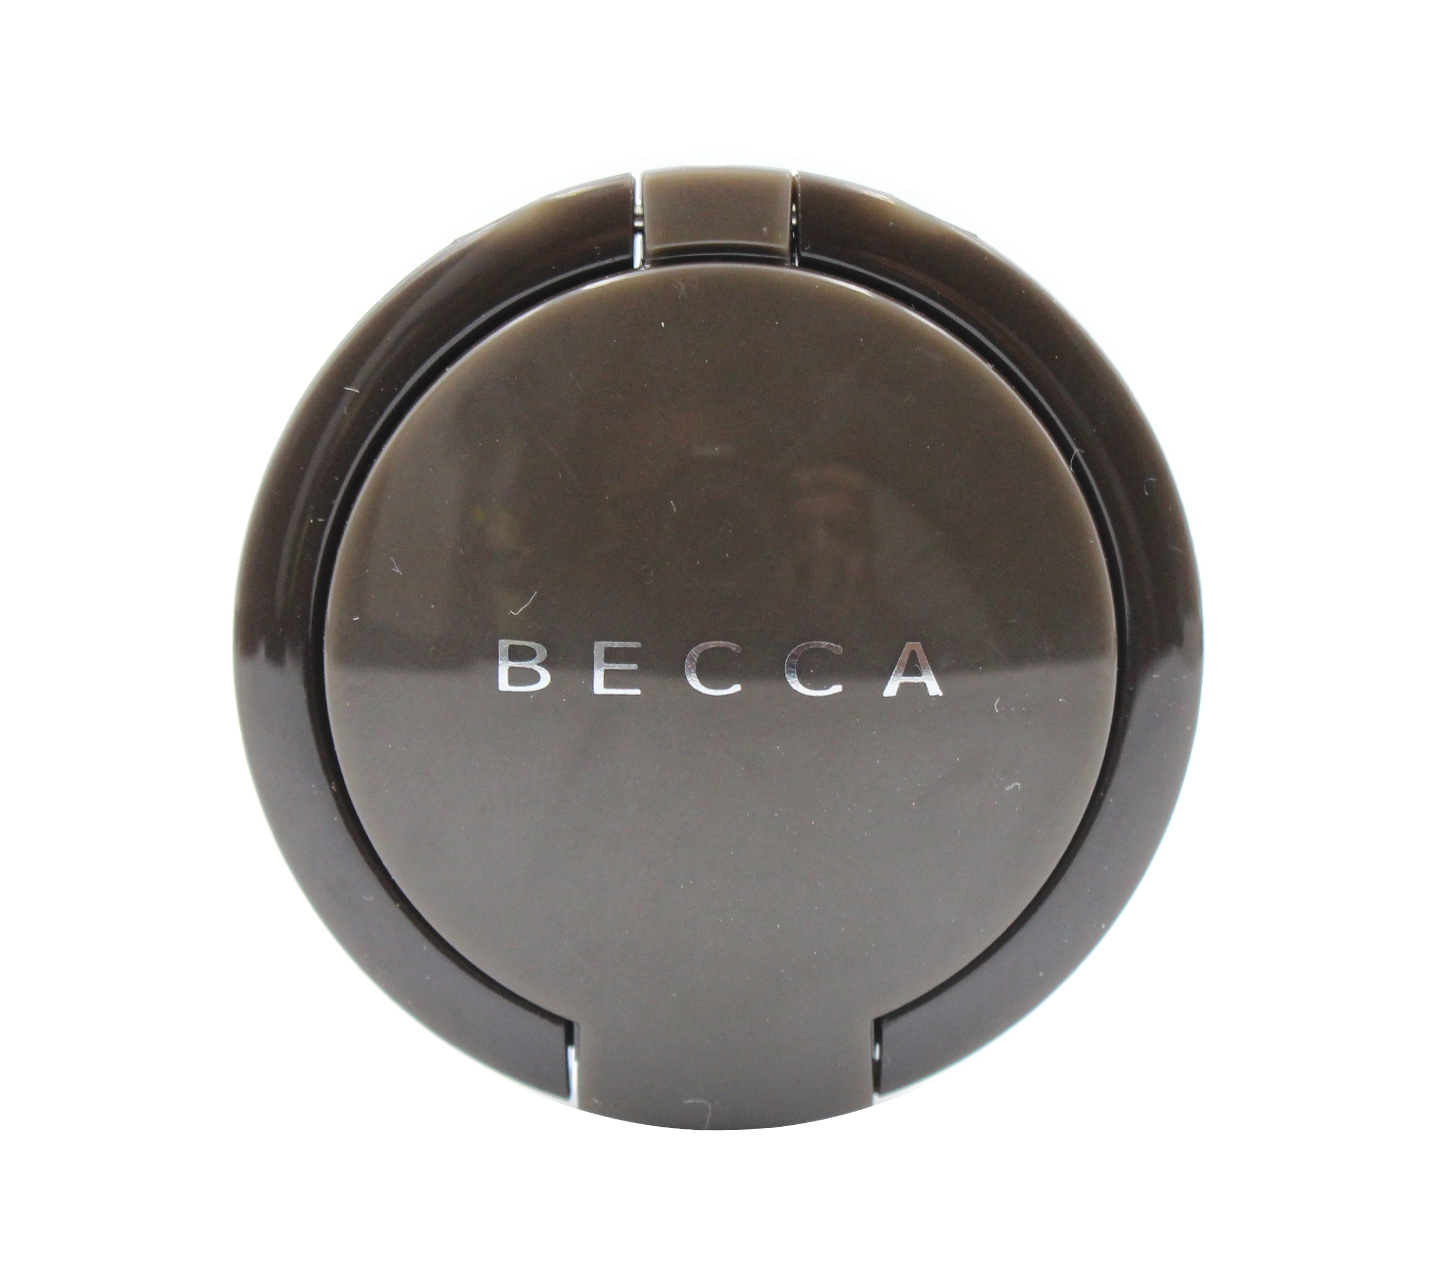 Becca Shimmering Skin Perfector Campagne Pop Faces